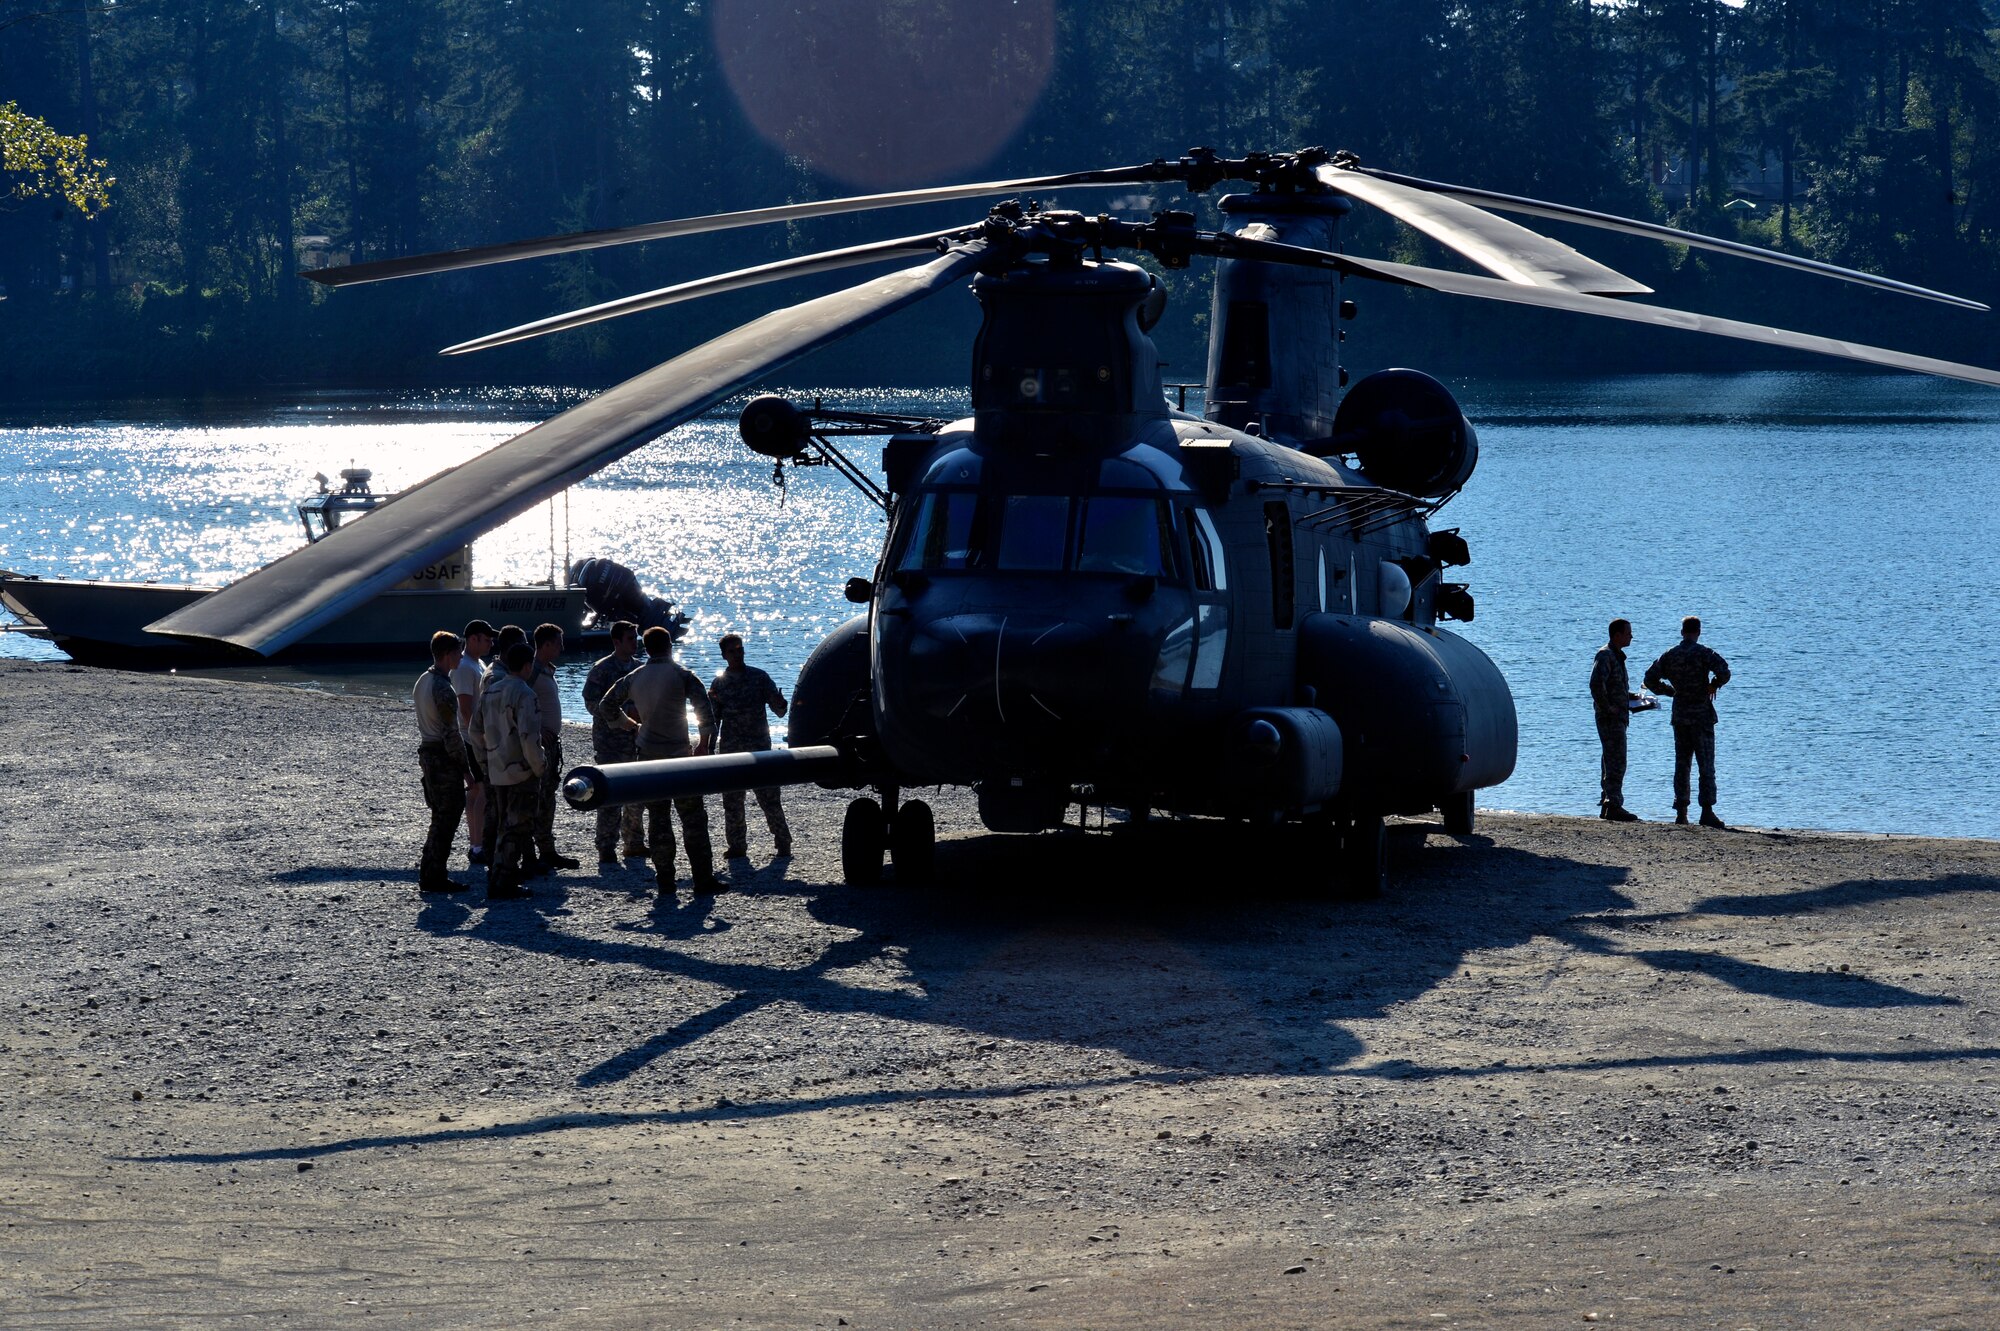 Airmen from McChord Field’s 22nd Special Tactics Squadron’s Red Team are briefed on the features of an MH-47 Chinook helicopter July 14, 2014, by Soldiers from the 160th Special Operations Aviation Regiment at American Lake on Joint Base Lewis-McChord, Wash. The Airmen and Soldiers met face-to-face before conducting day and nighttime helocast operations. (U.S. Air Force photo/Staff Sgt. Russ Jackson)